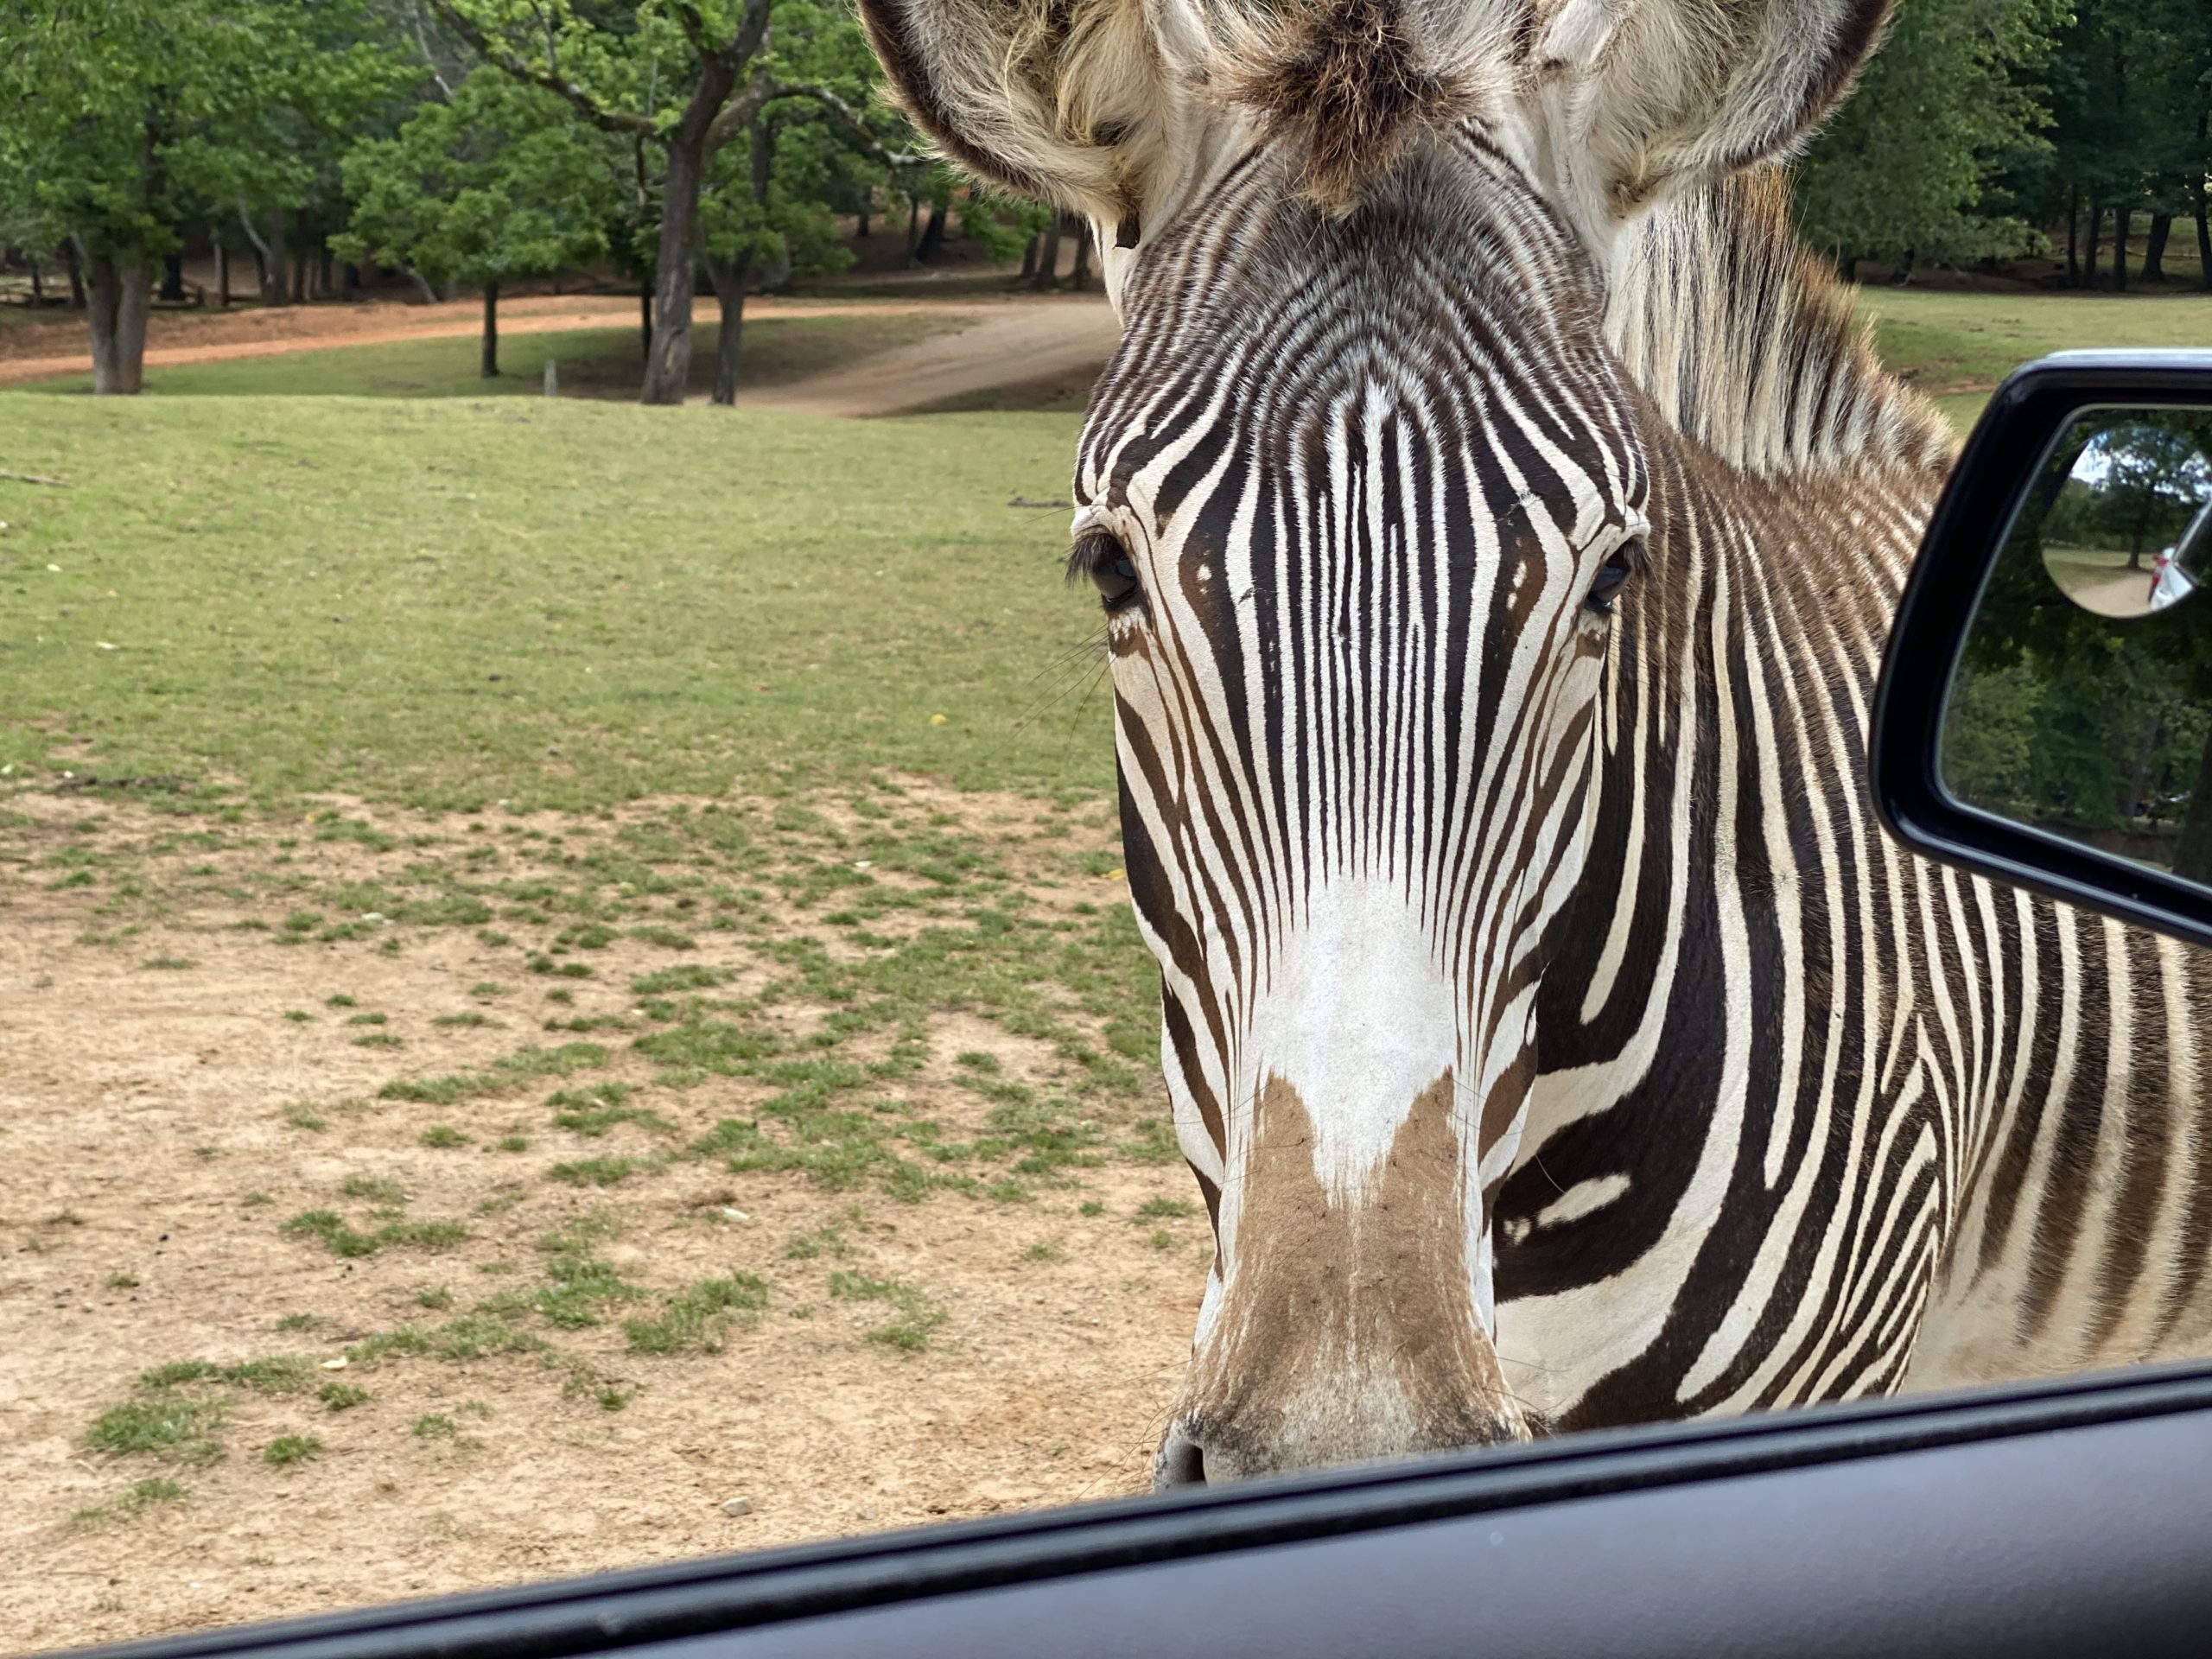 Lazy 5 Ranch - Drive Through Zoo in Mooresville NC - Things to Do With Kids- Day Trips and Family Travel in North Carolina zebra